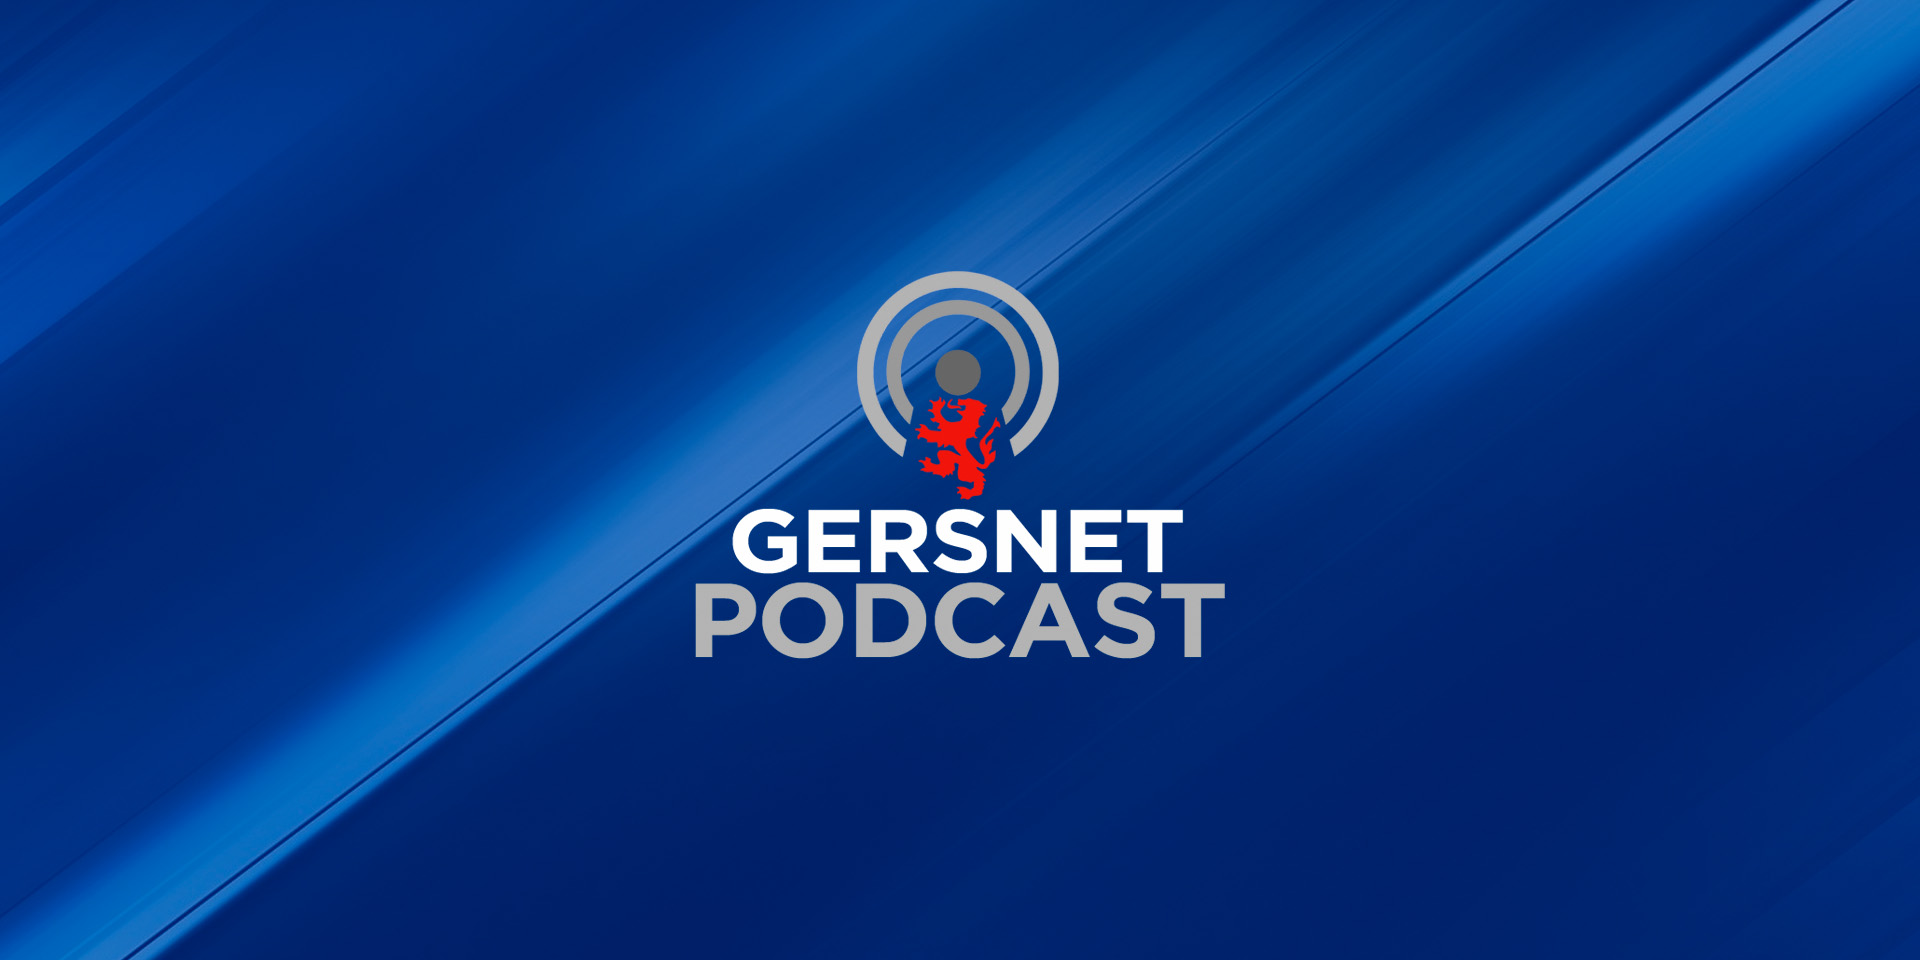 Gersnet Podcast 194 - Routing Ross County